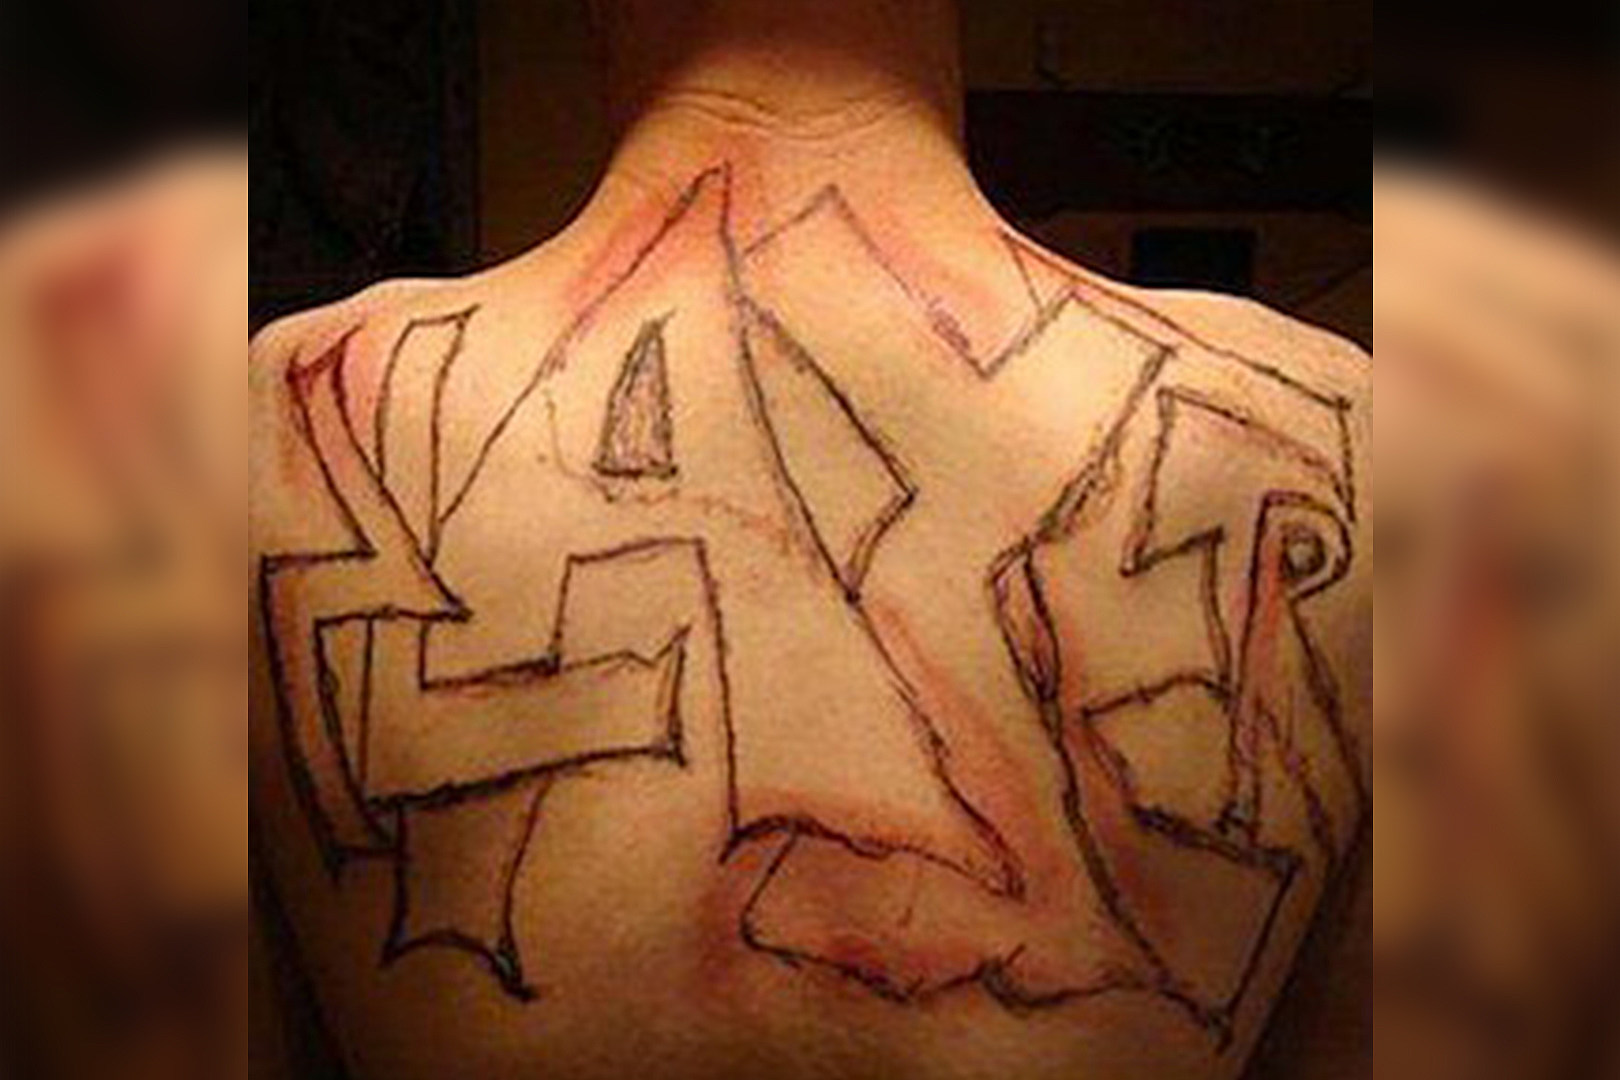 The Top 77 Worst Tattoos of All Time  Bad Tattoos Collection   c3kienthuyhpeduvn